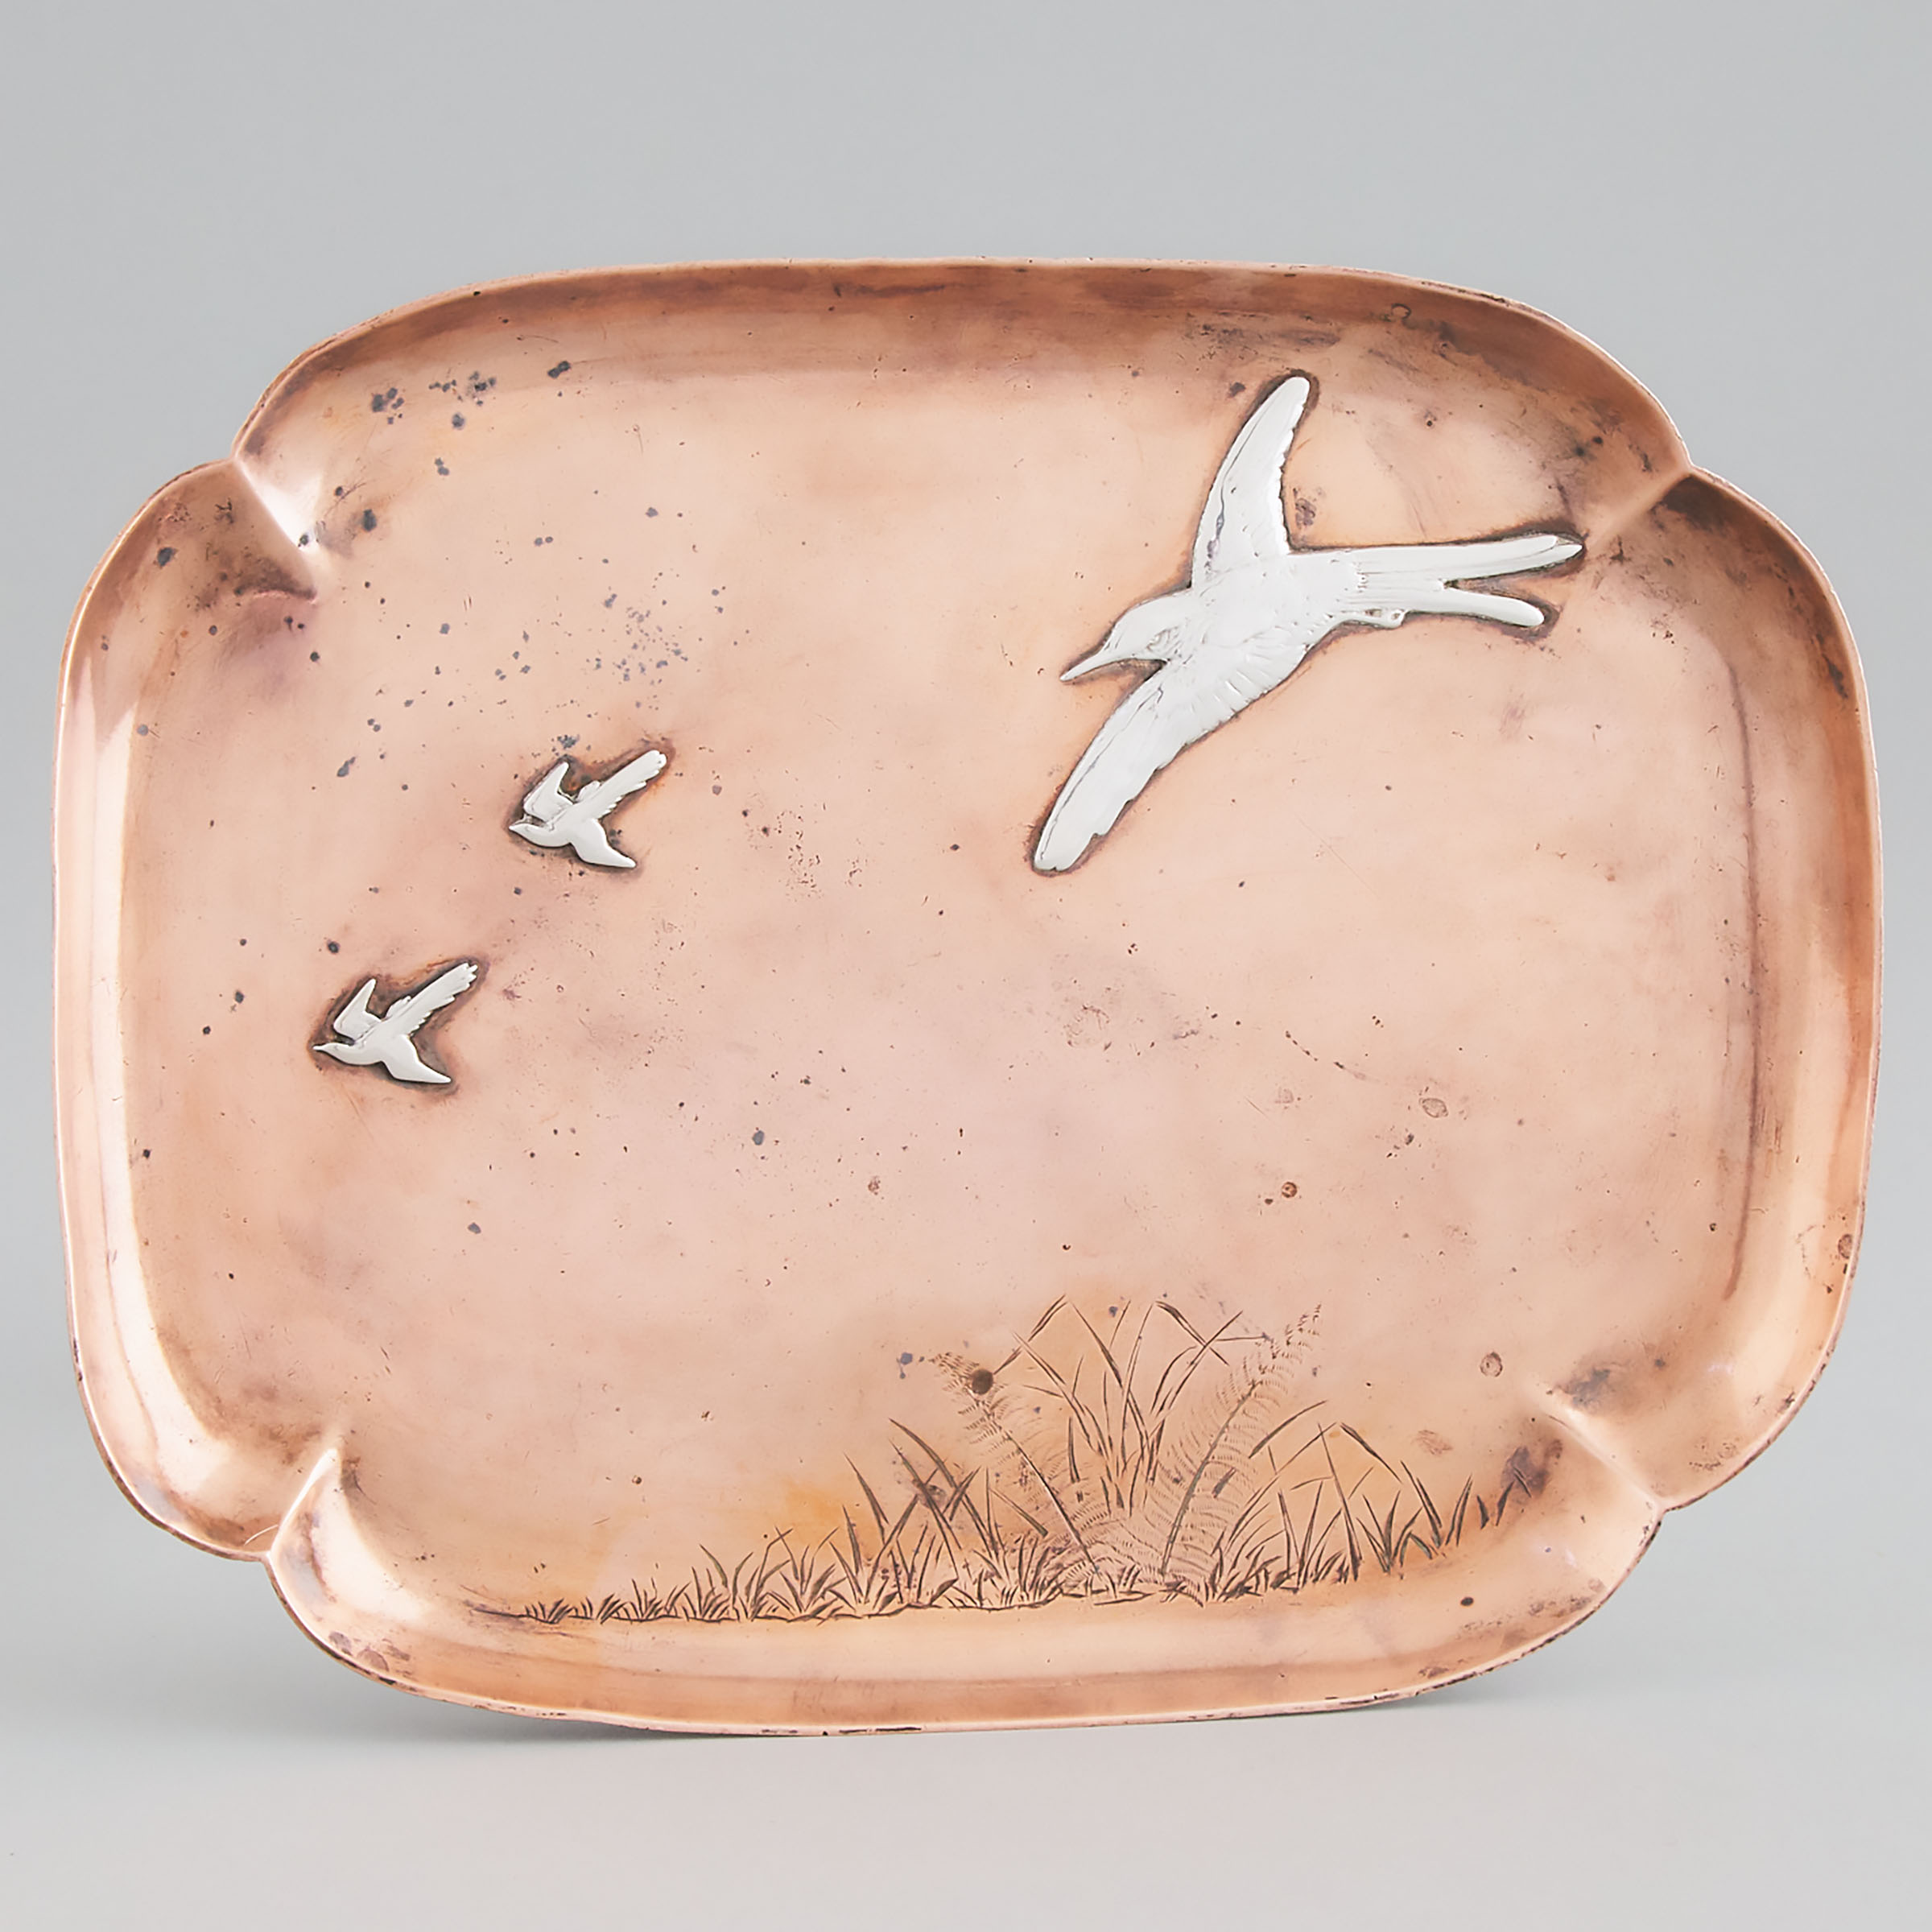 Gorham Co. Aesthetic Movement Silver Mounted Copper Tray, 1881